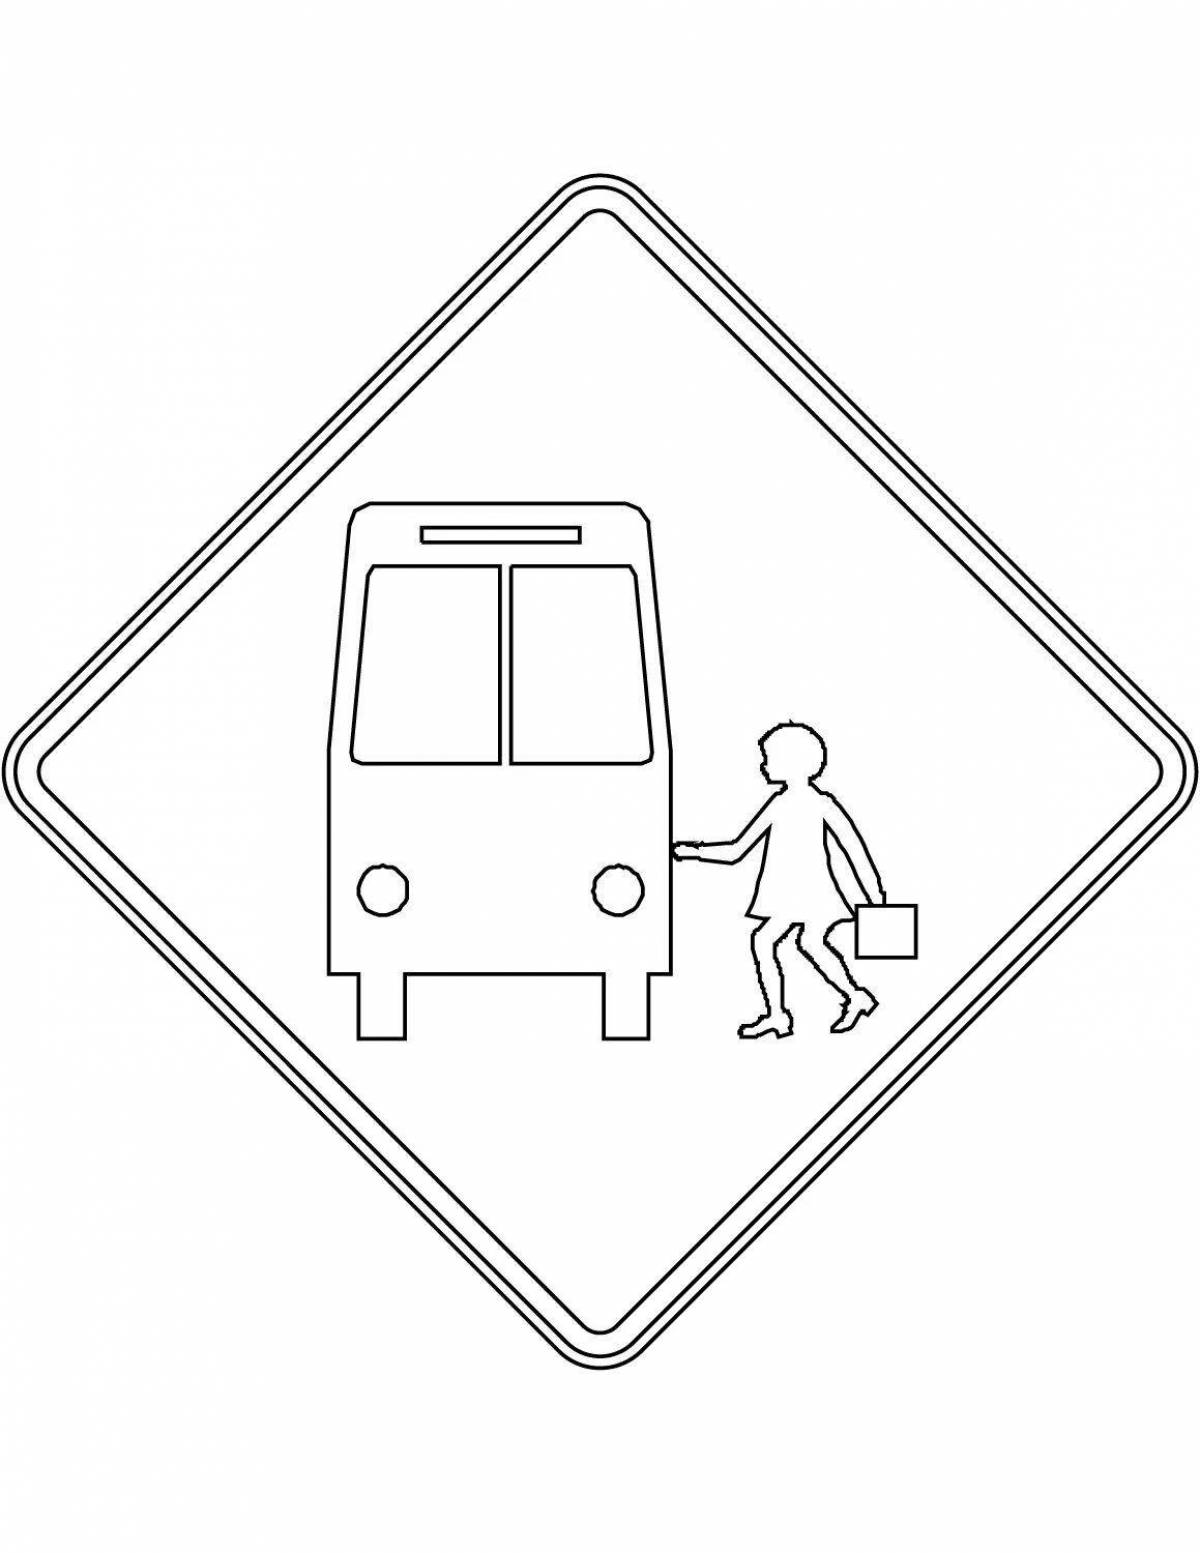 Give way sign coloring page